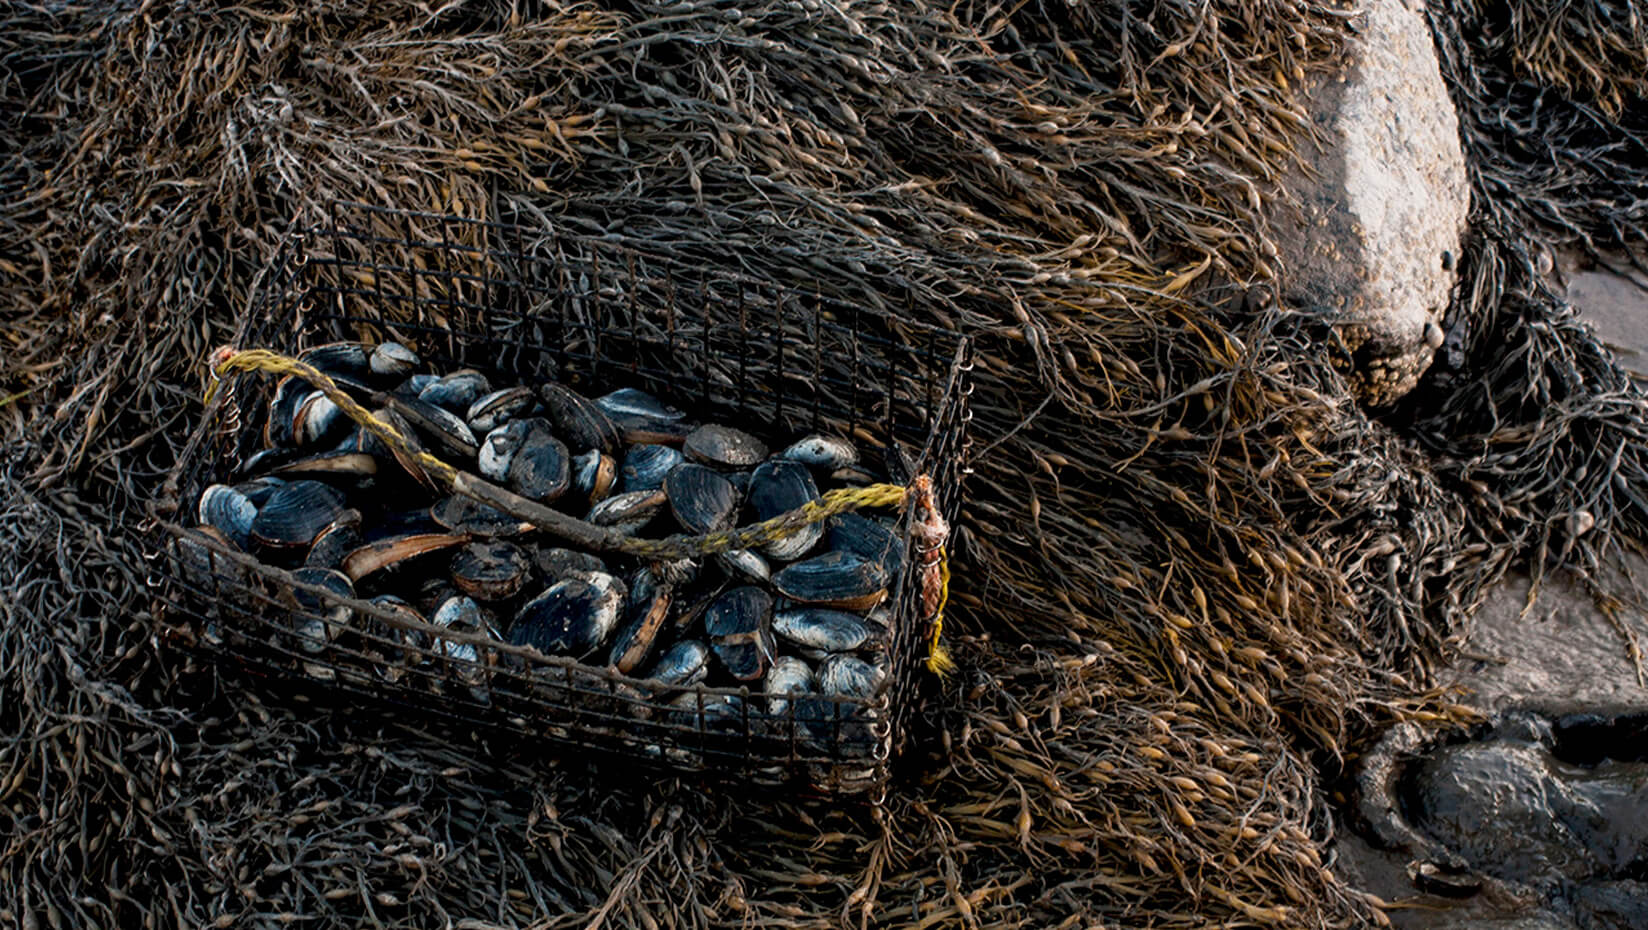 Clams in a basket sitting on seaweed